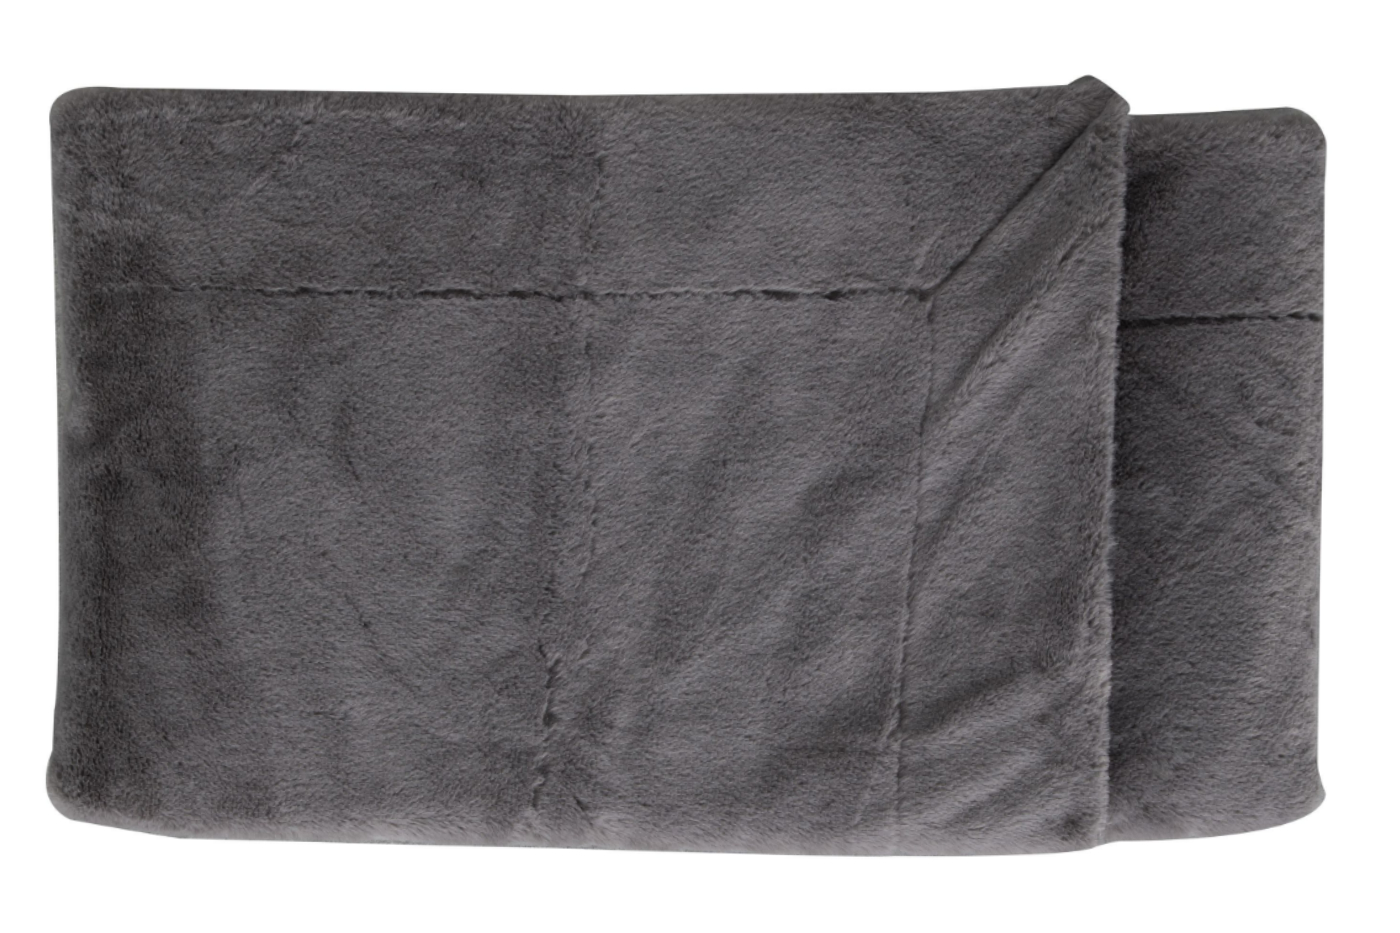 View Light Grey Soft Touch Cosy Rolled Flannel Fleece Throw 1800 x 1400mm Ideal For Beds Or Sofas Stitched Piped Edging Adds Texture And Warmth information